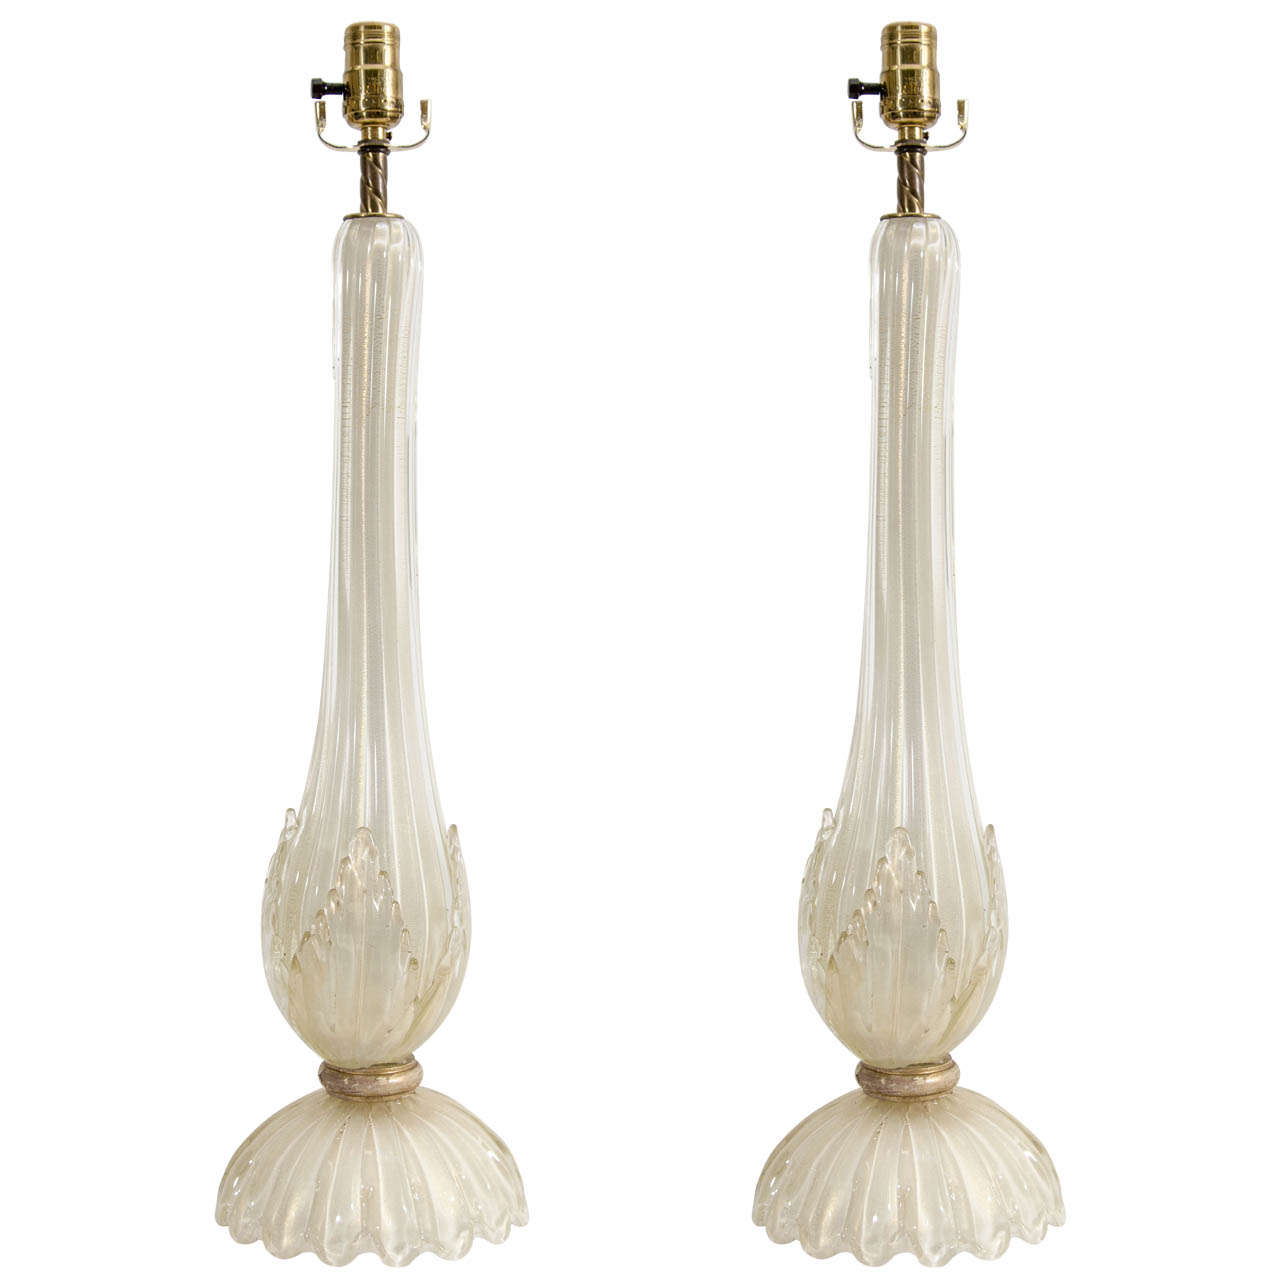 A Midcentury Pair of Barovier & Toso Murano Glass Lamps